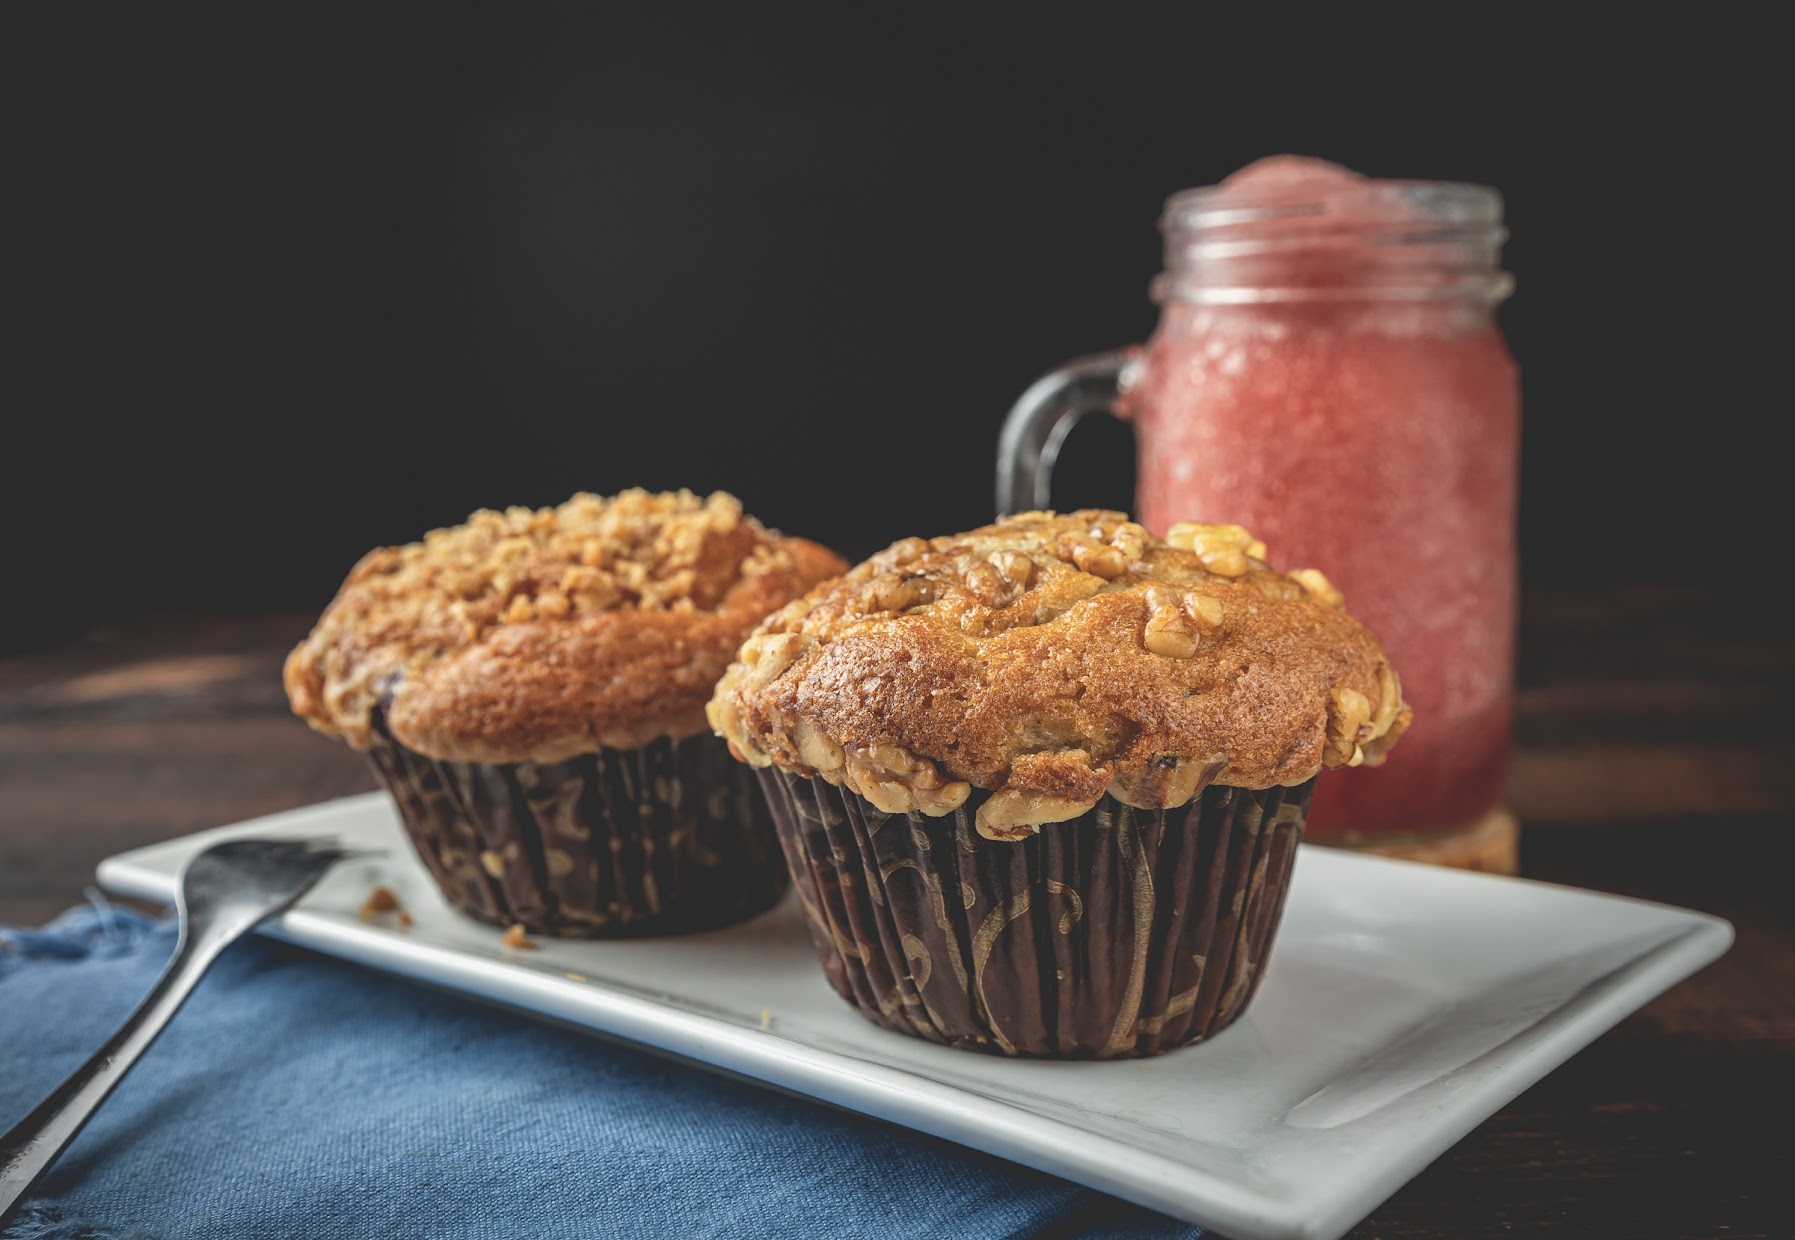 Muffins and a glass of frozen berry beverage